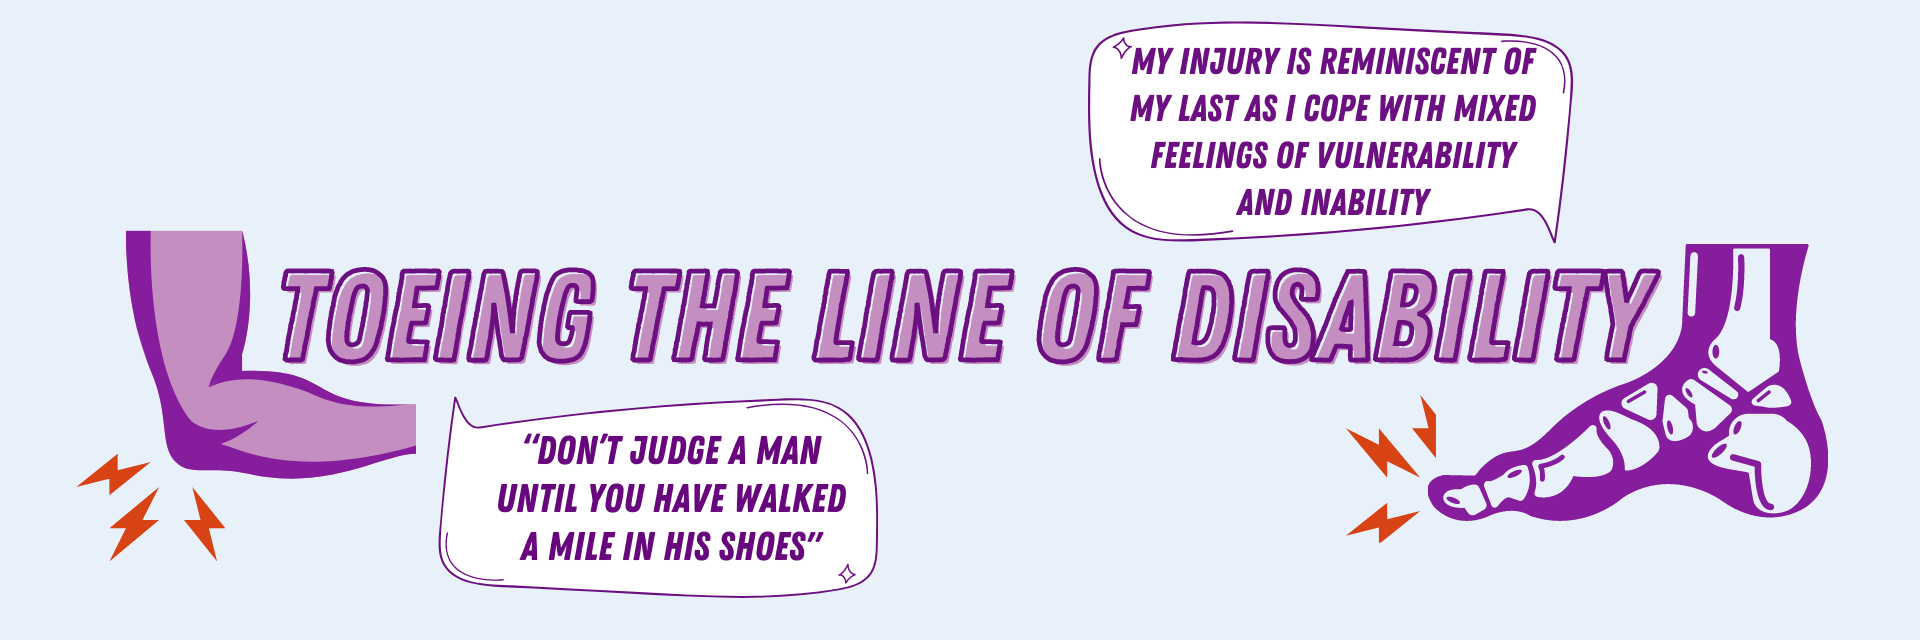 Title Text:  Toeing the Line of Disability. Graphics:  Elbow  injury and toe/foot injury.  Speech bubble text:  Don't judge a man until you have walked a mile in his shoes.  My injury is reminiscent of my last as I cope with mixed feelings of vulnerability and inability.